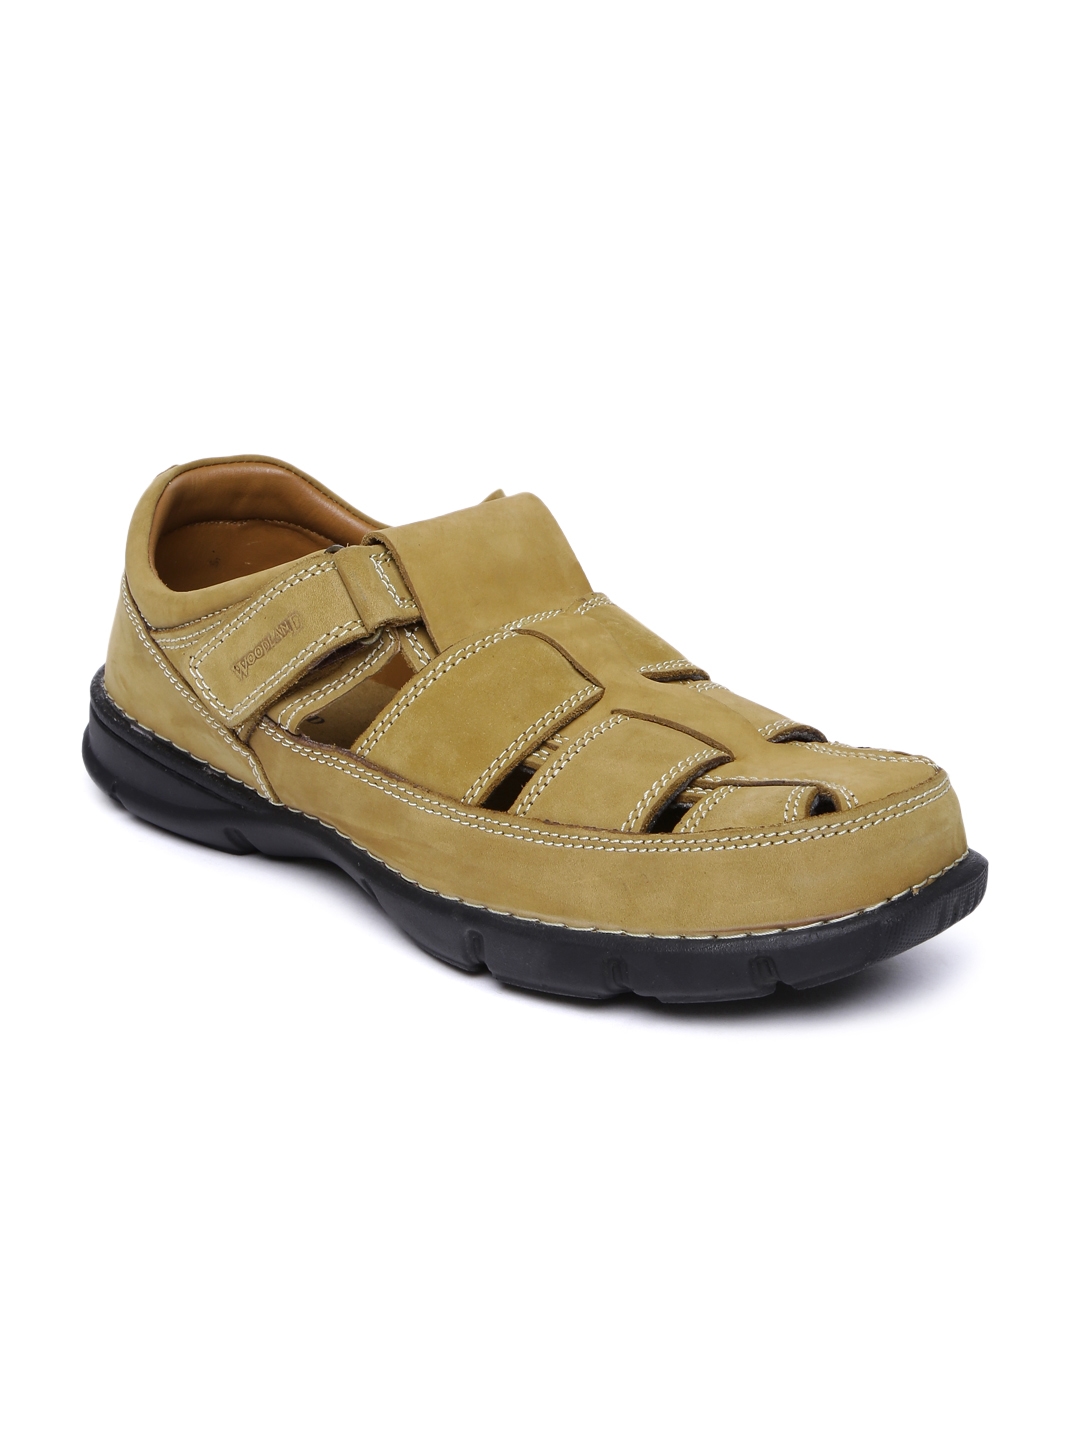 Buy Woodland Sandals For Men  Green  Online at Low Prices in India   Paytmmallcom